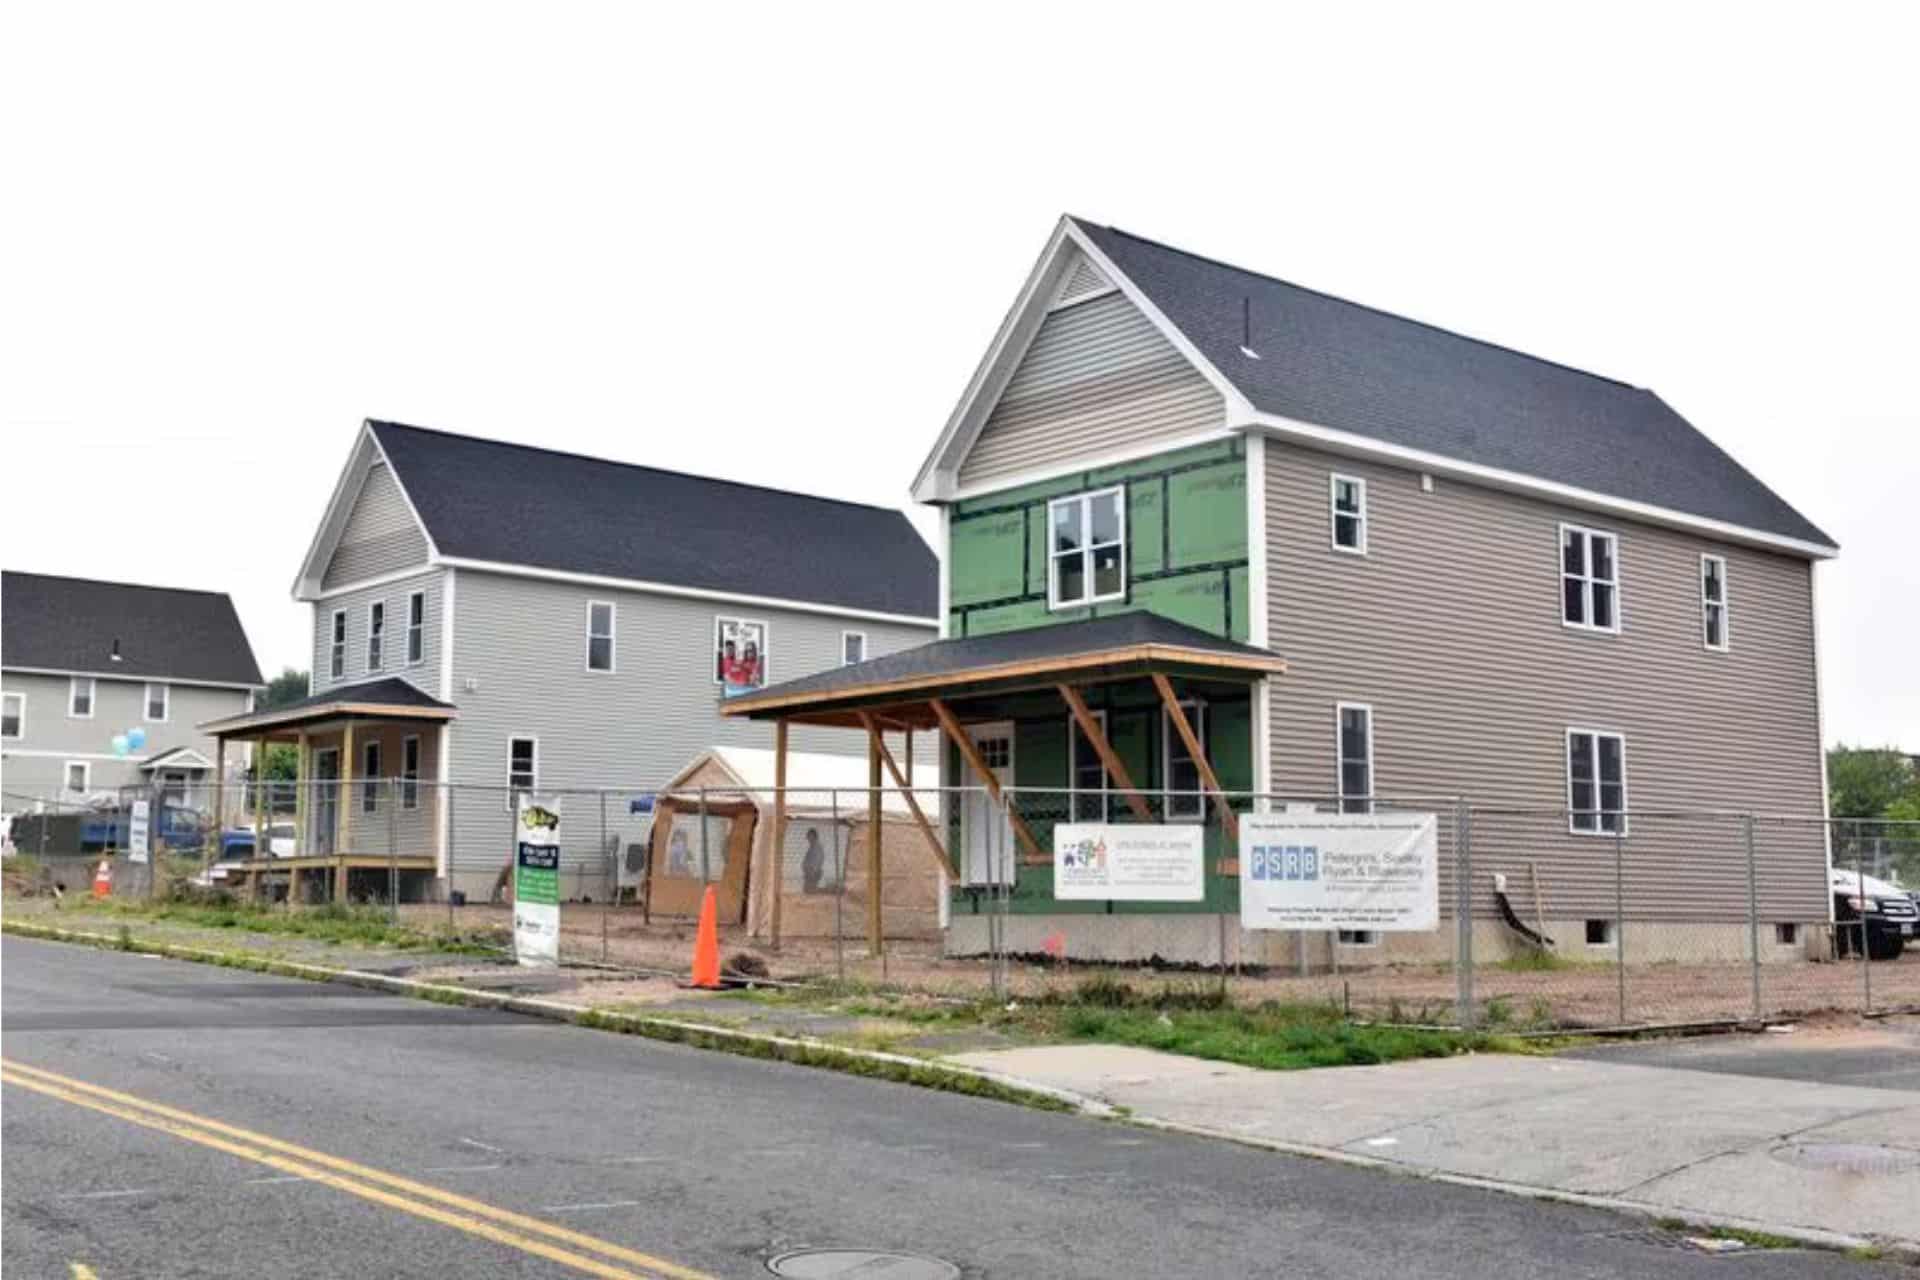 Washington to fund affordable housing projects